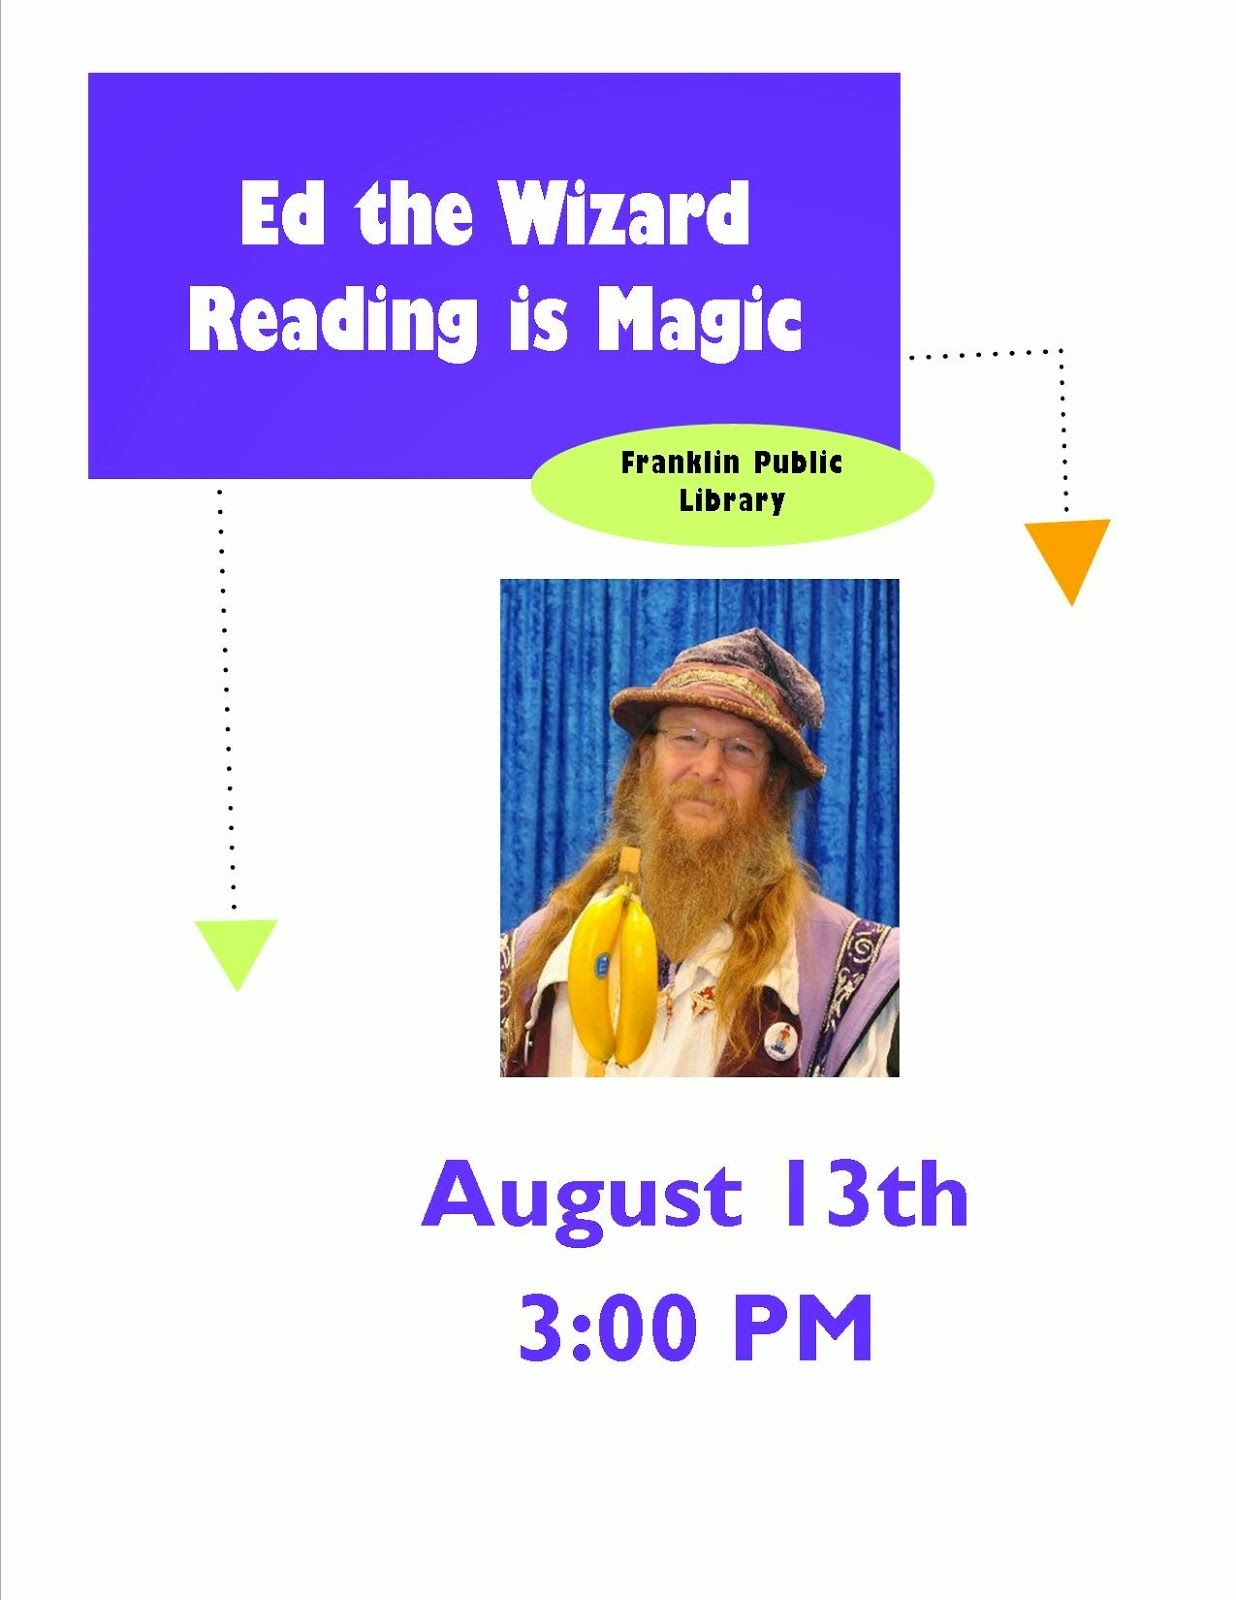 Ed the Wizard - "Reading is Magic"